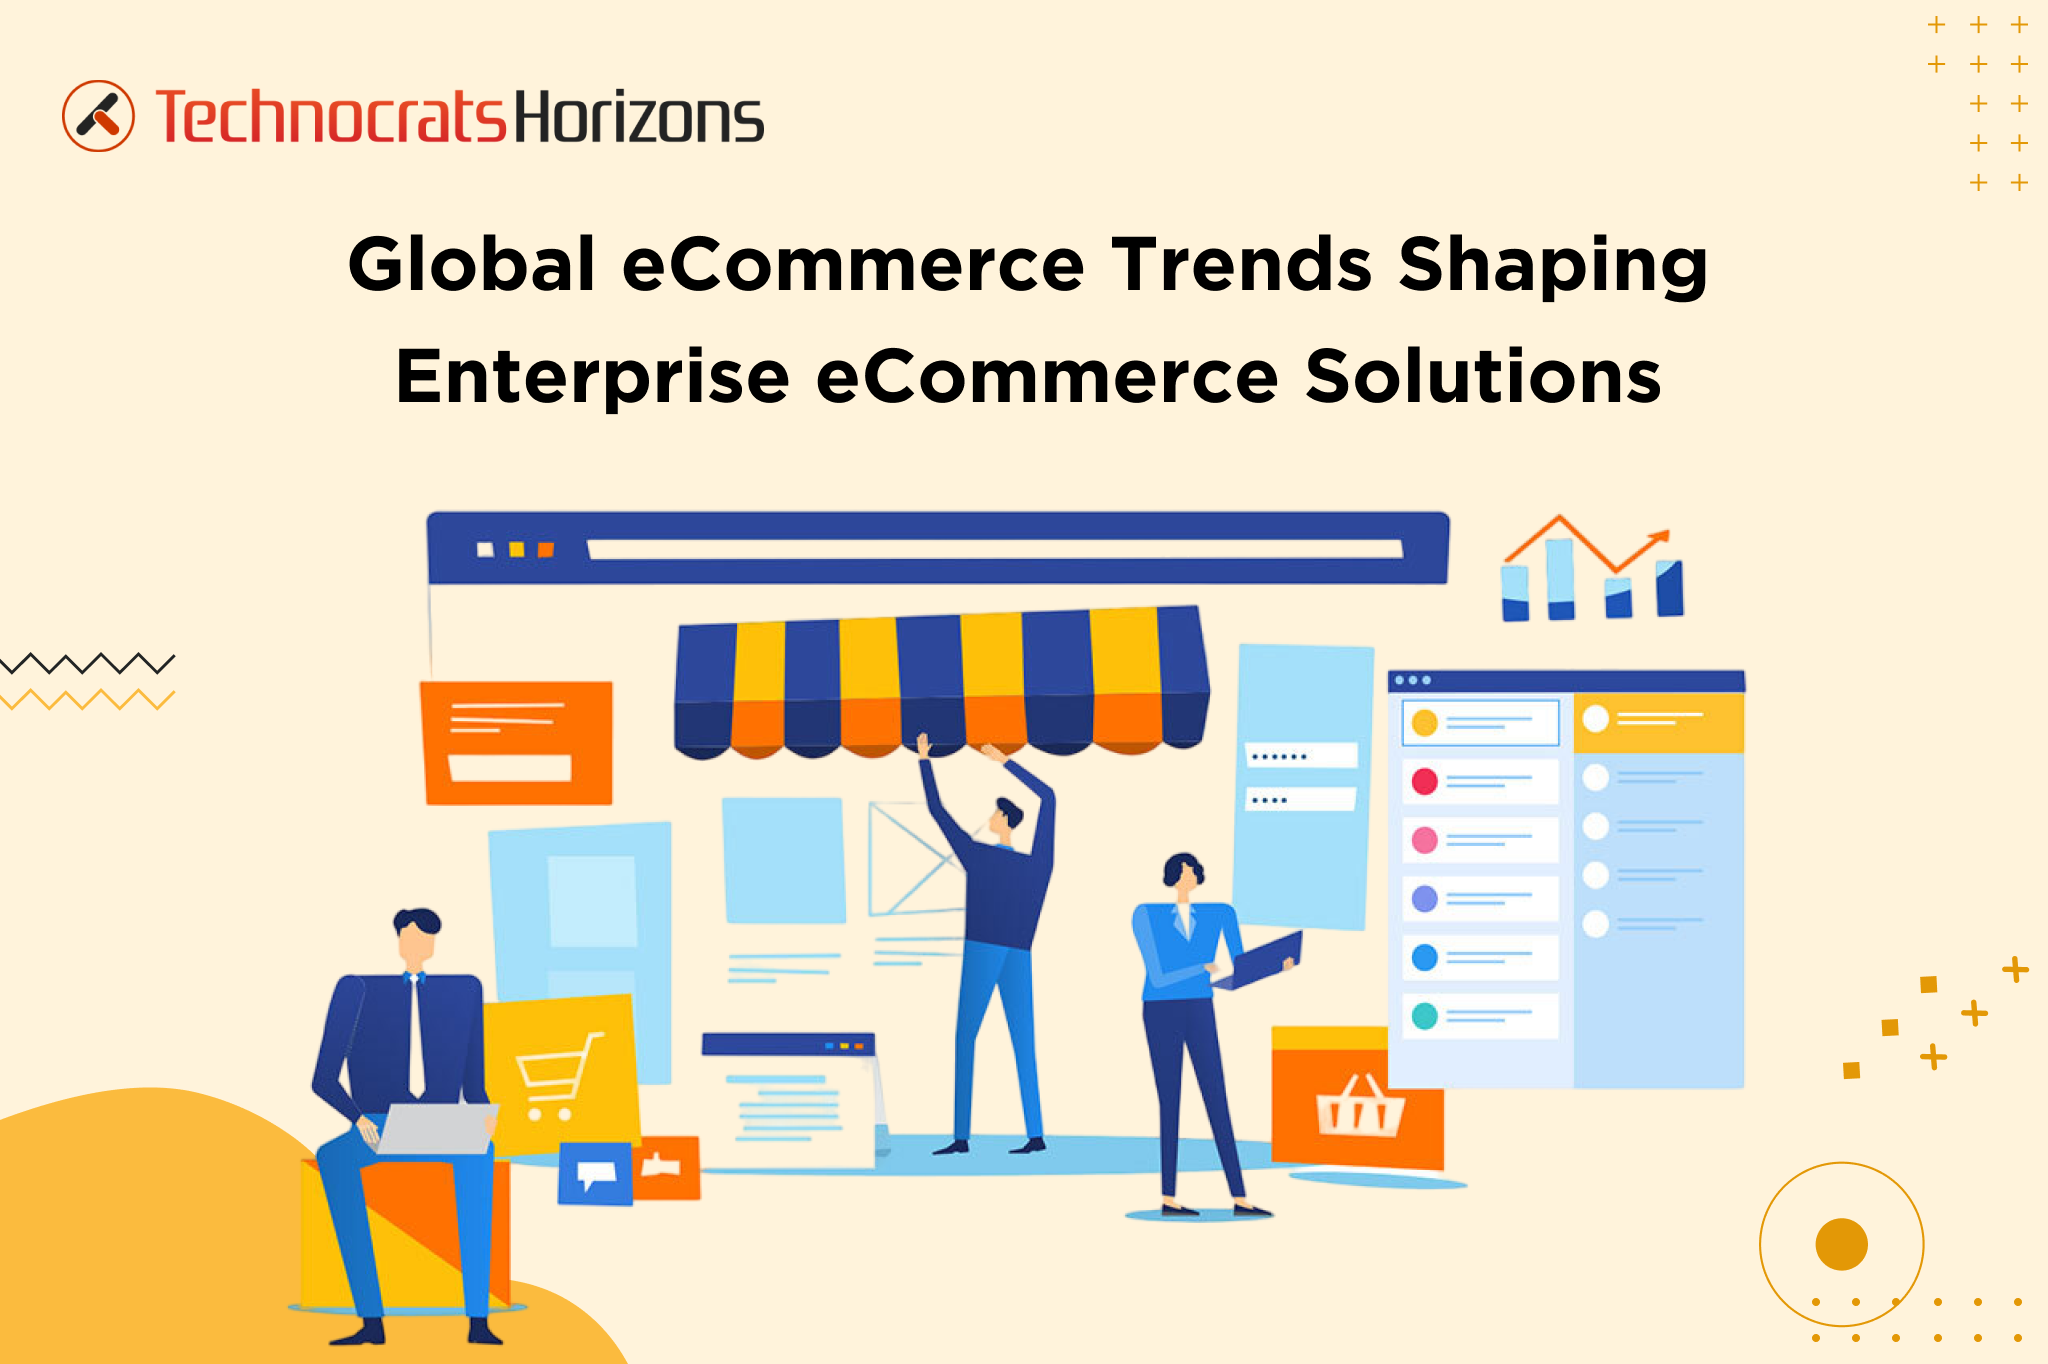 Global eCommerce Trends in Enterprise eCommerce Solutions You Should Know About